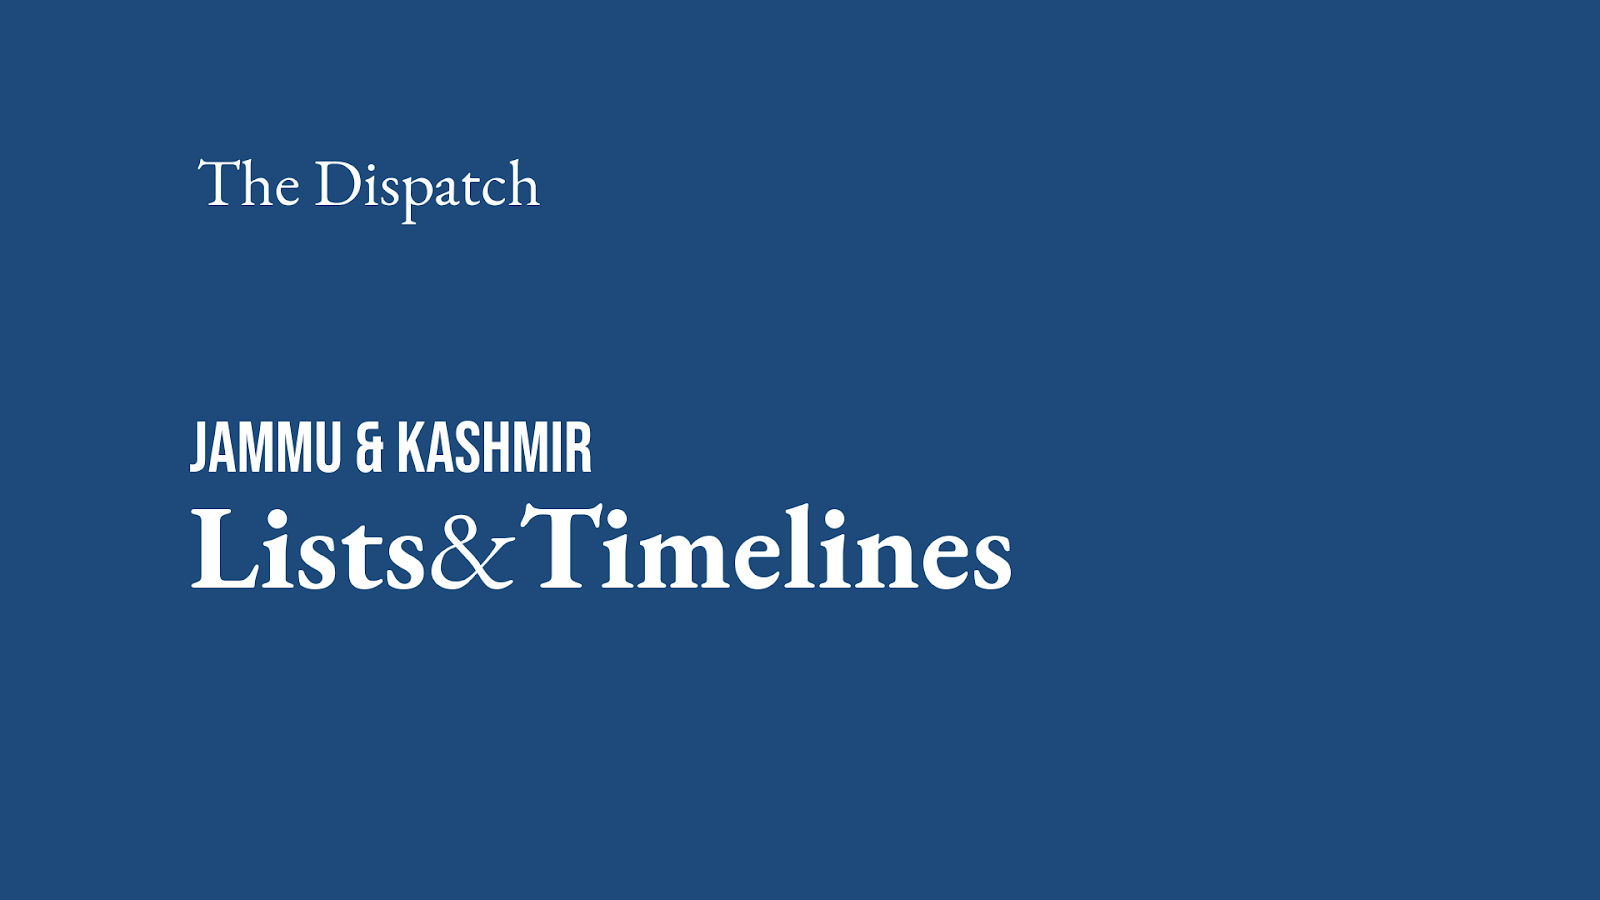 Kashmir 1947 to 1957: A timeline of key events – The Dispatch